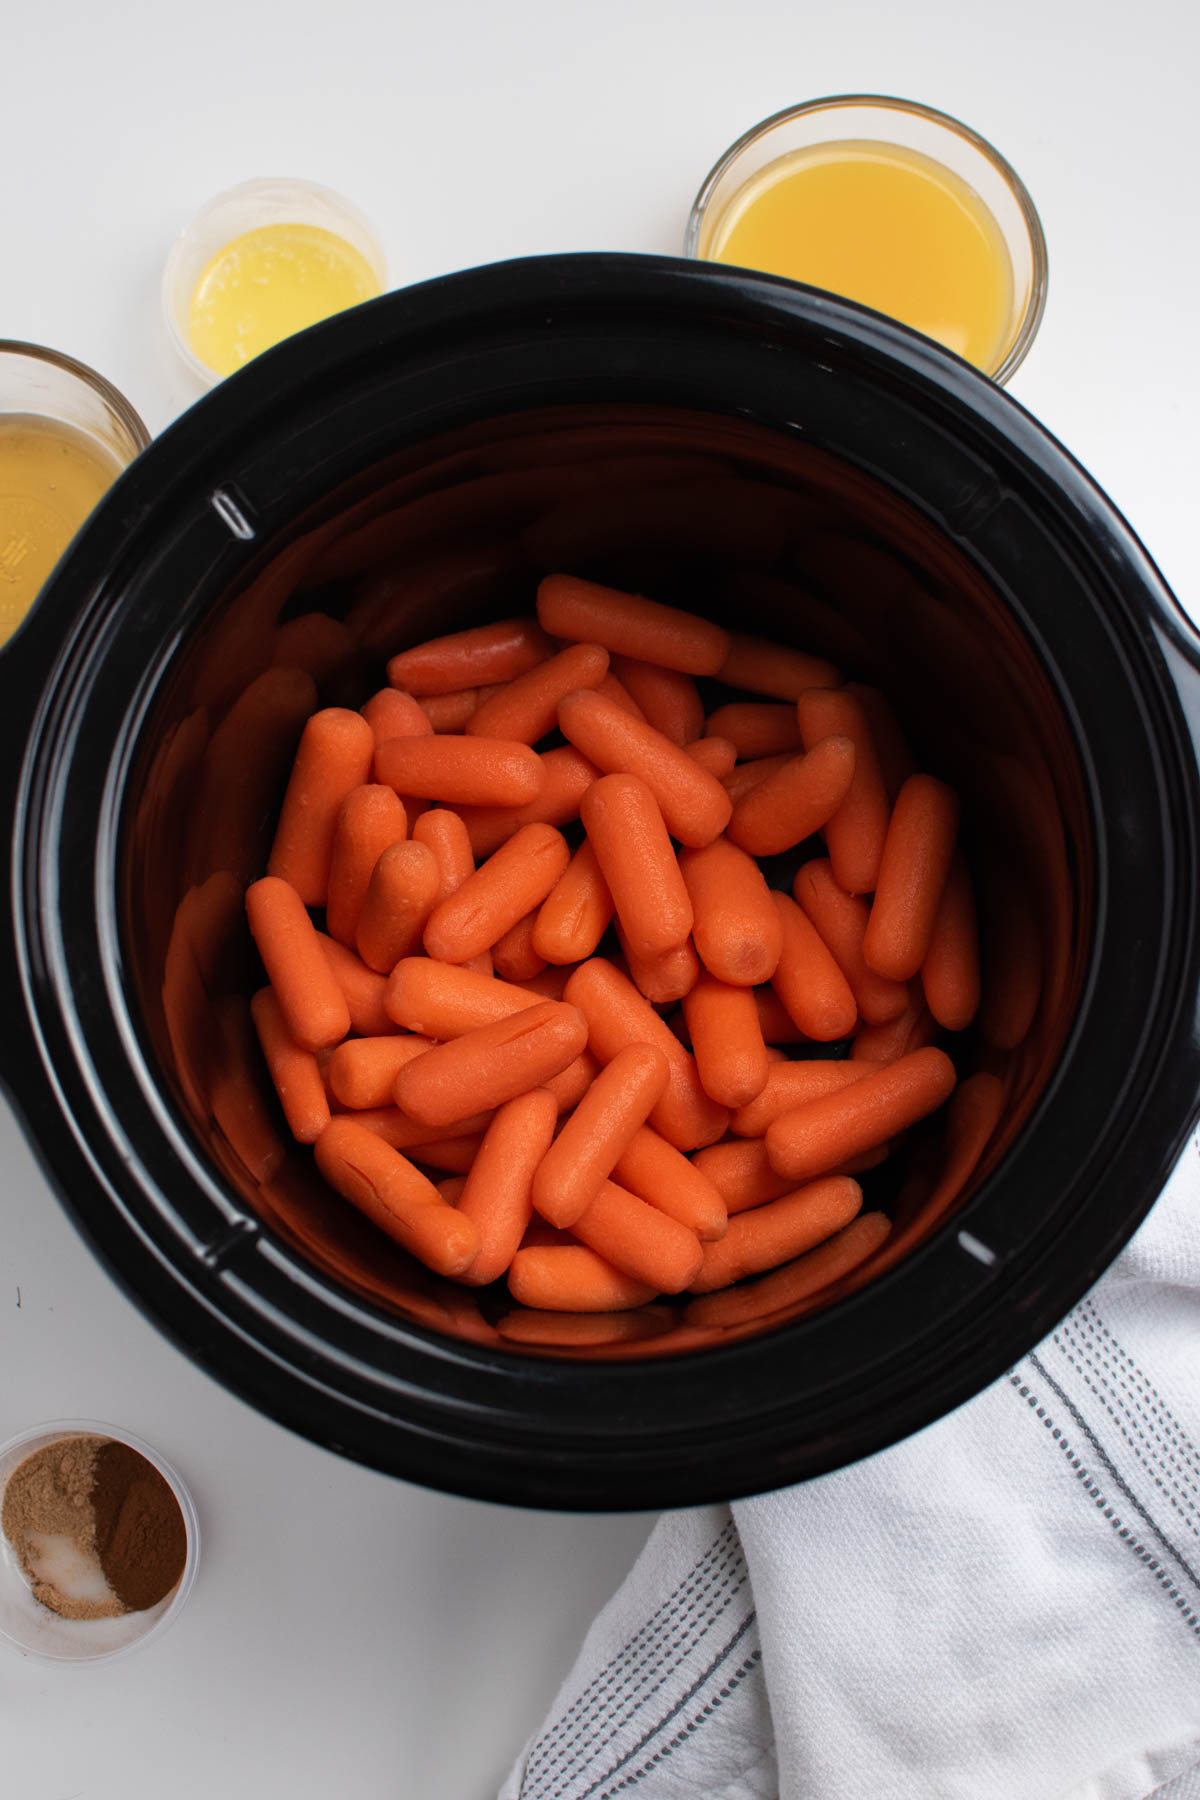 Several baby carrots in black Crockpot insert surrounded by other ingredients.